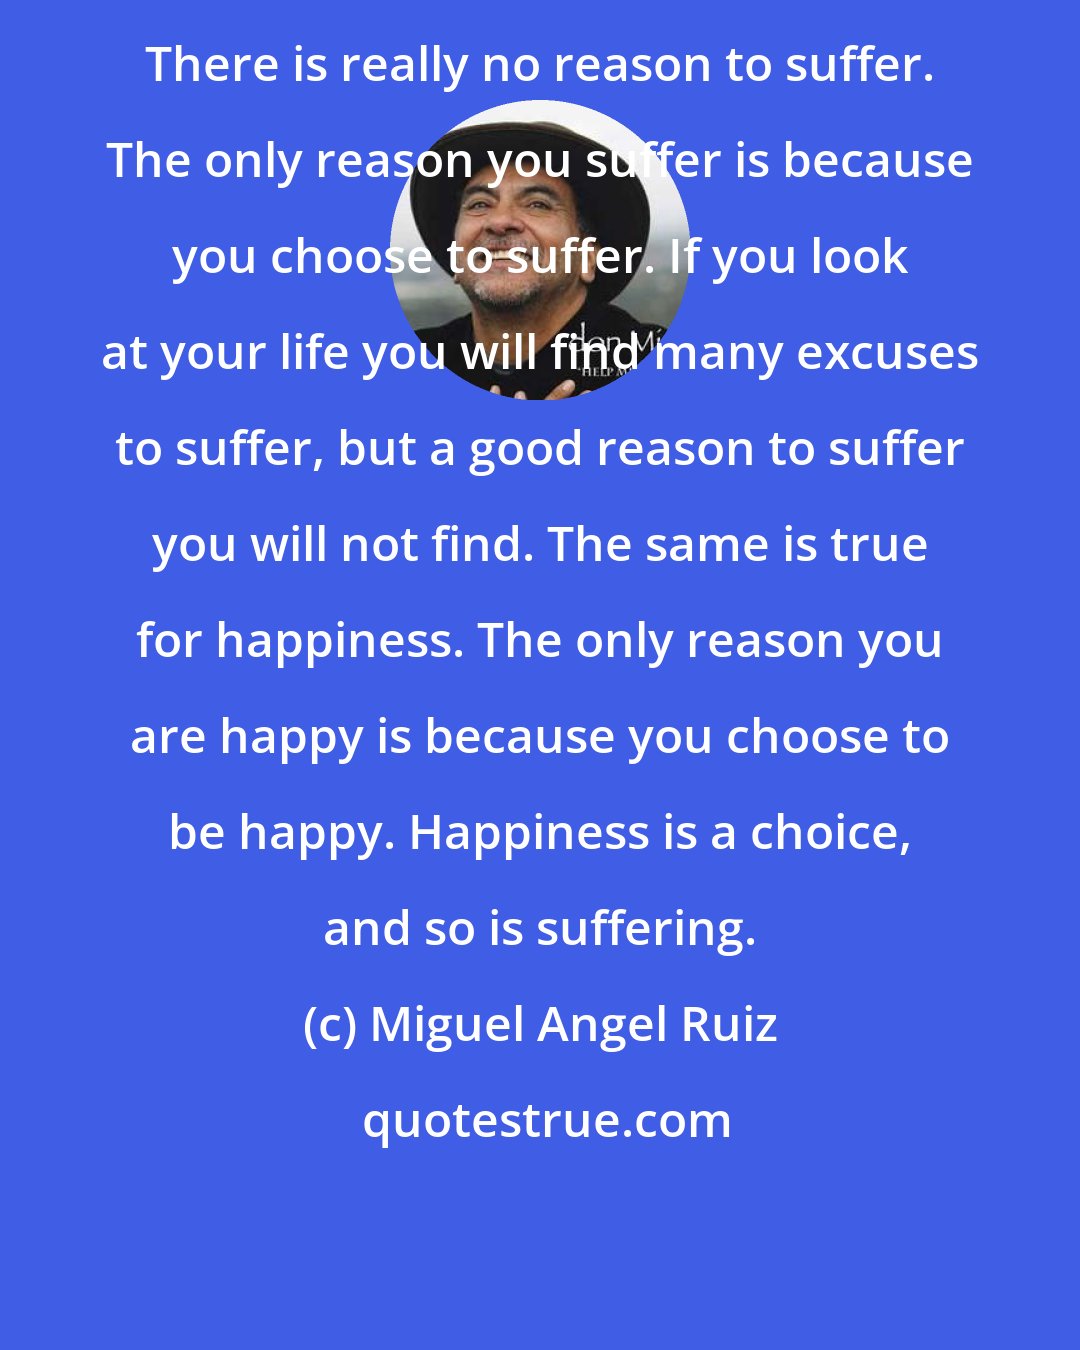 Miguel Angel Ruiz: There is really no reason to suffer. The only reason you suffer is because you choose to suffer. If you look at your life you will find many excuses to suffer, but a good reason to suffer you will not find. The same is true for happiness. The only reason you are happy is because you choose to be happy. Happiness is a choice, and so is suffering.